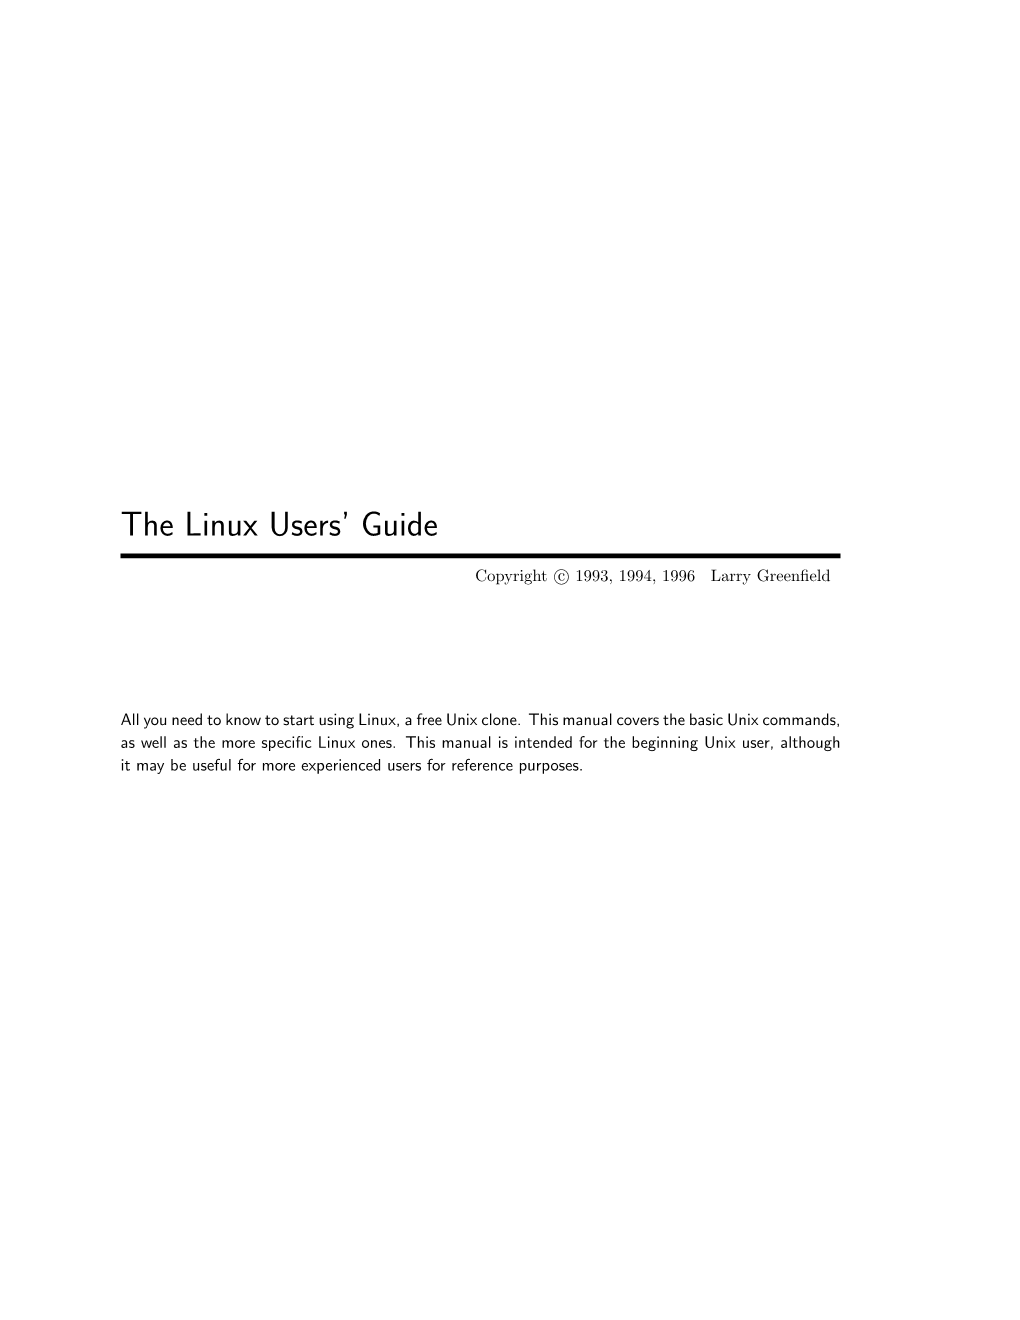 The Linux Users' Guide